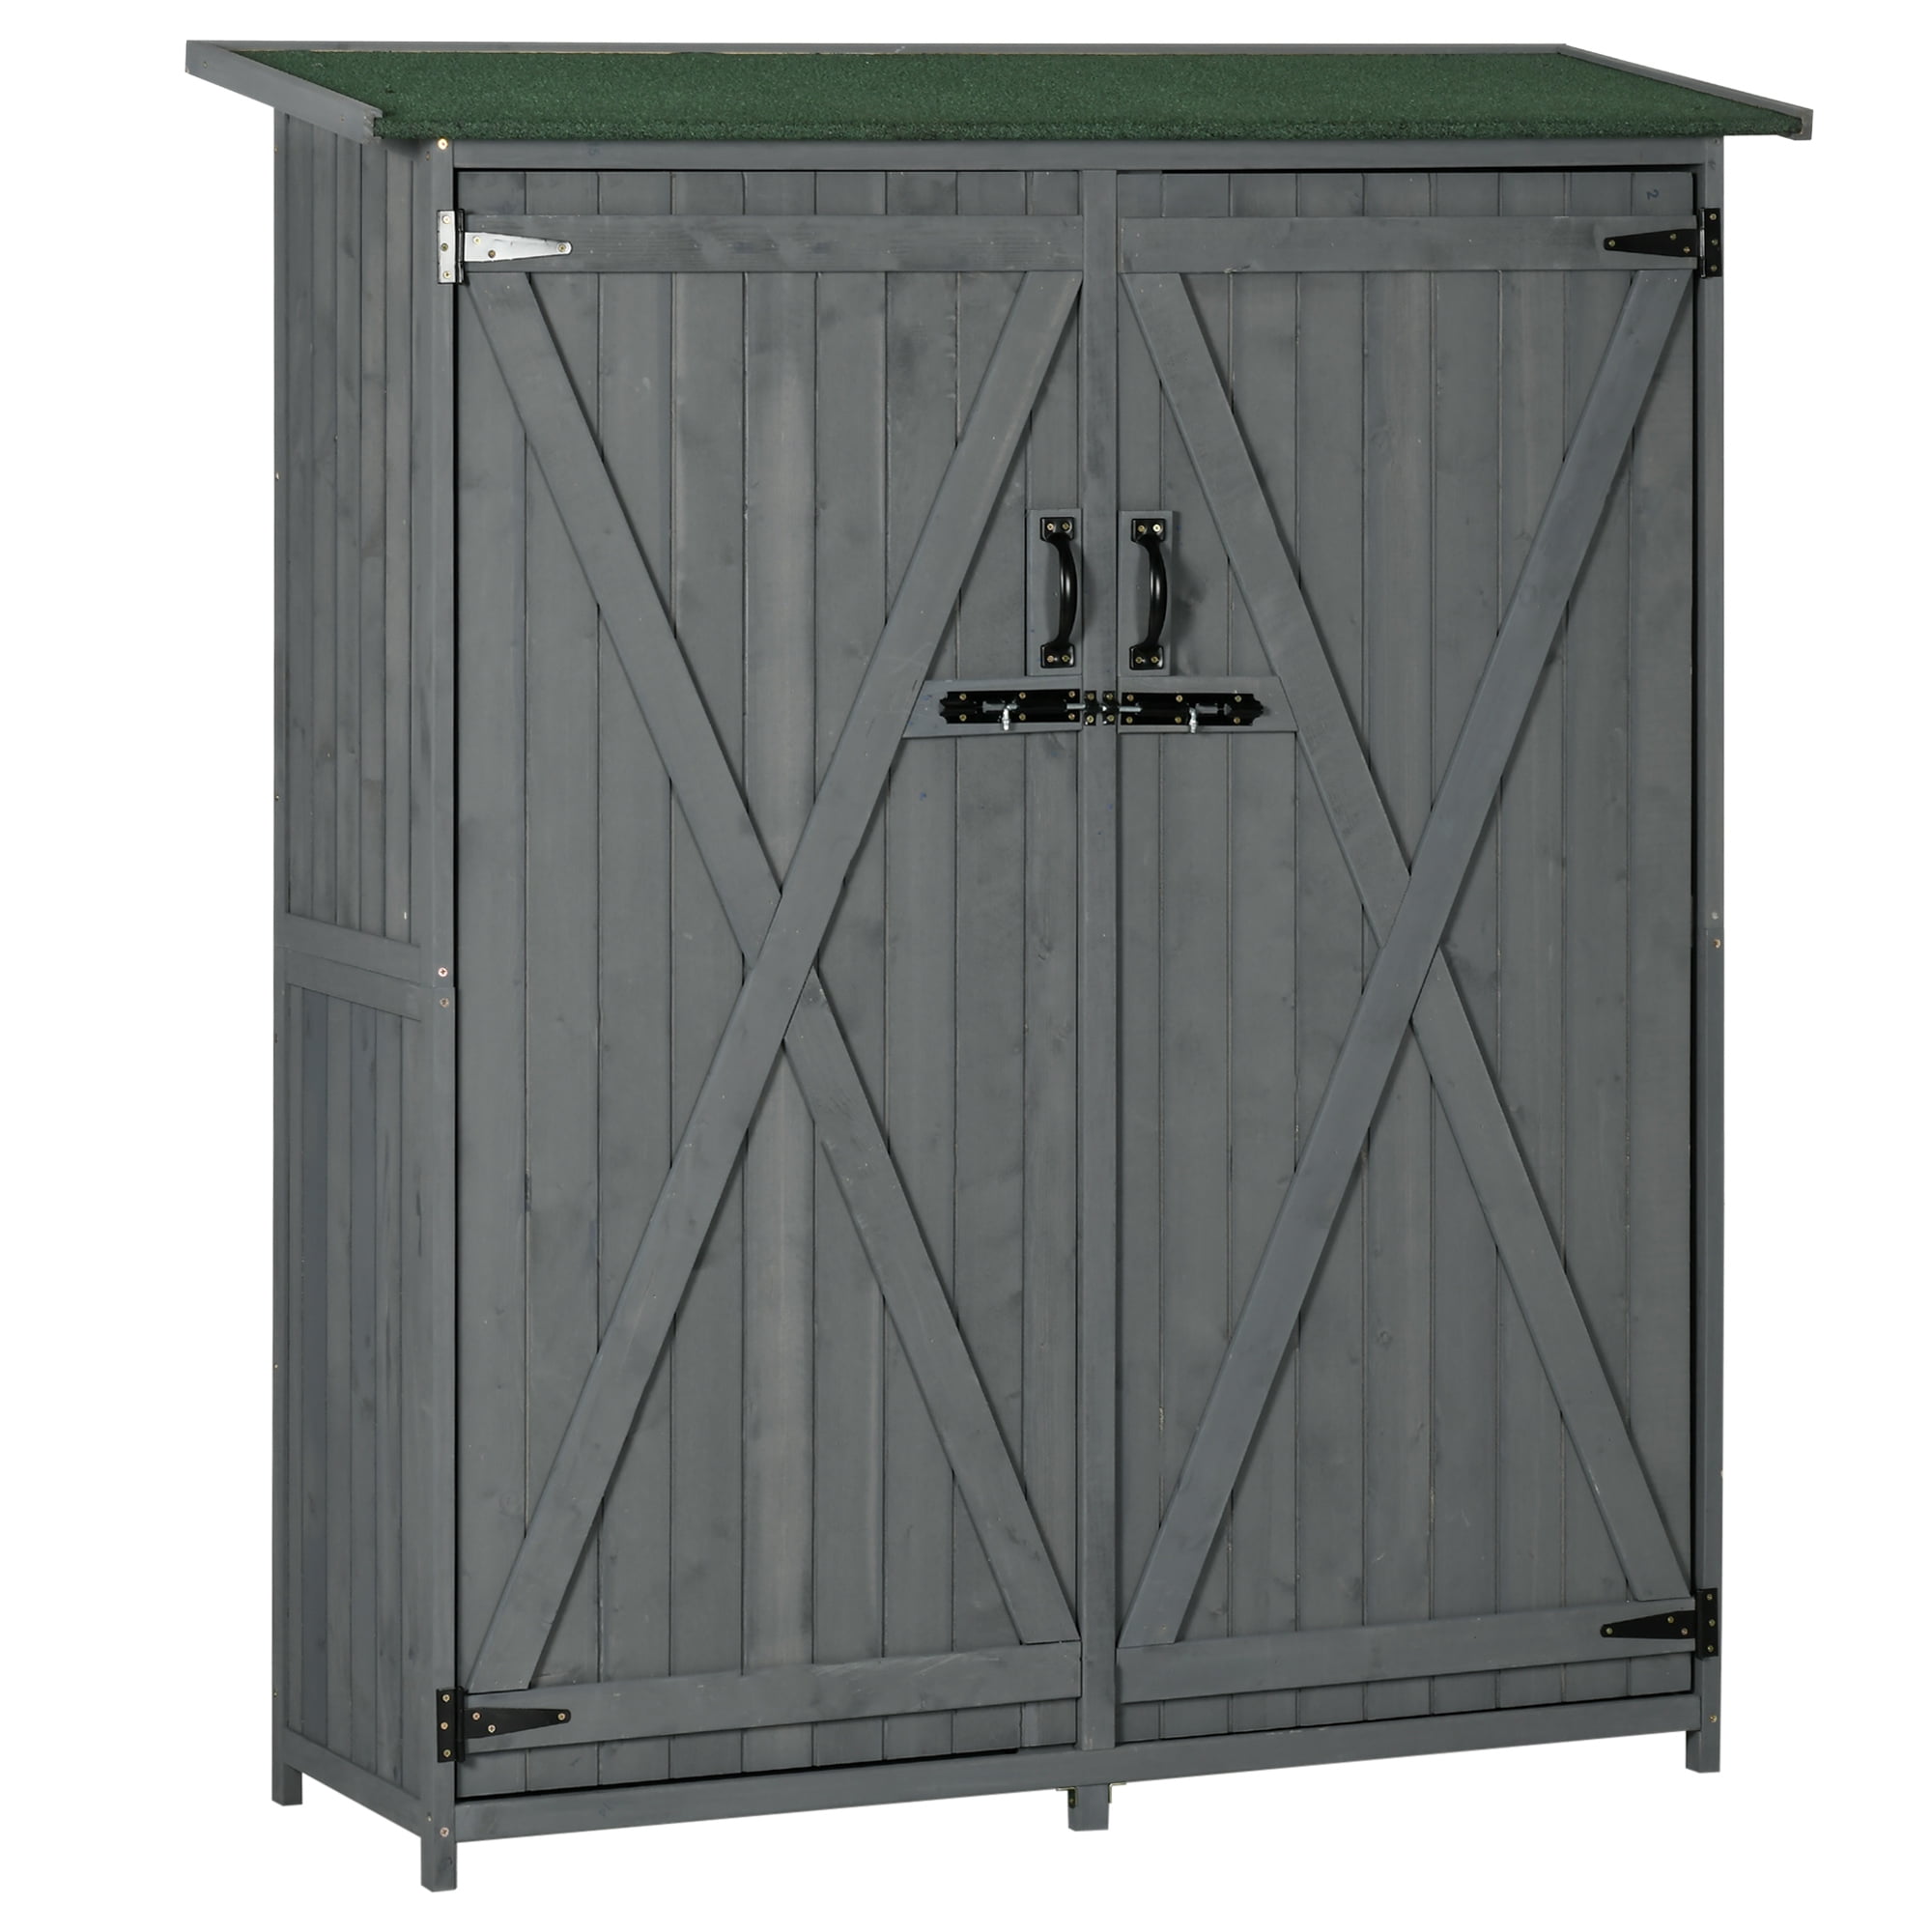 EAST OAK Outdoor Storage Shed, 53Cu.ft Vertical Resin Tool 4 x 6.6 FT  Cabinet w/o Shelf for Garden, Patio, Backyard, All-Weather Outdoor Storage